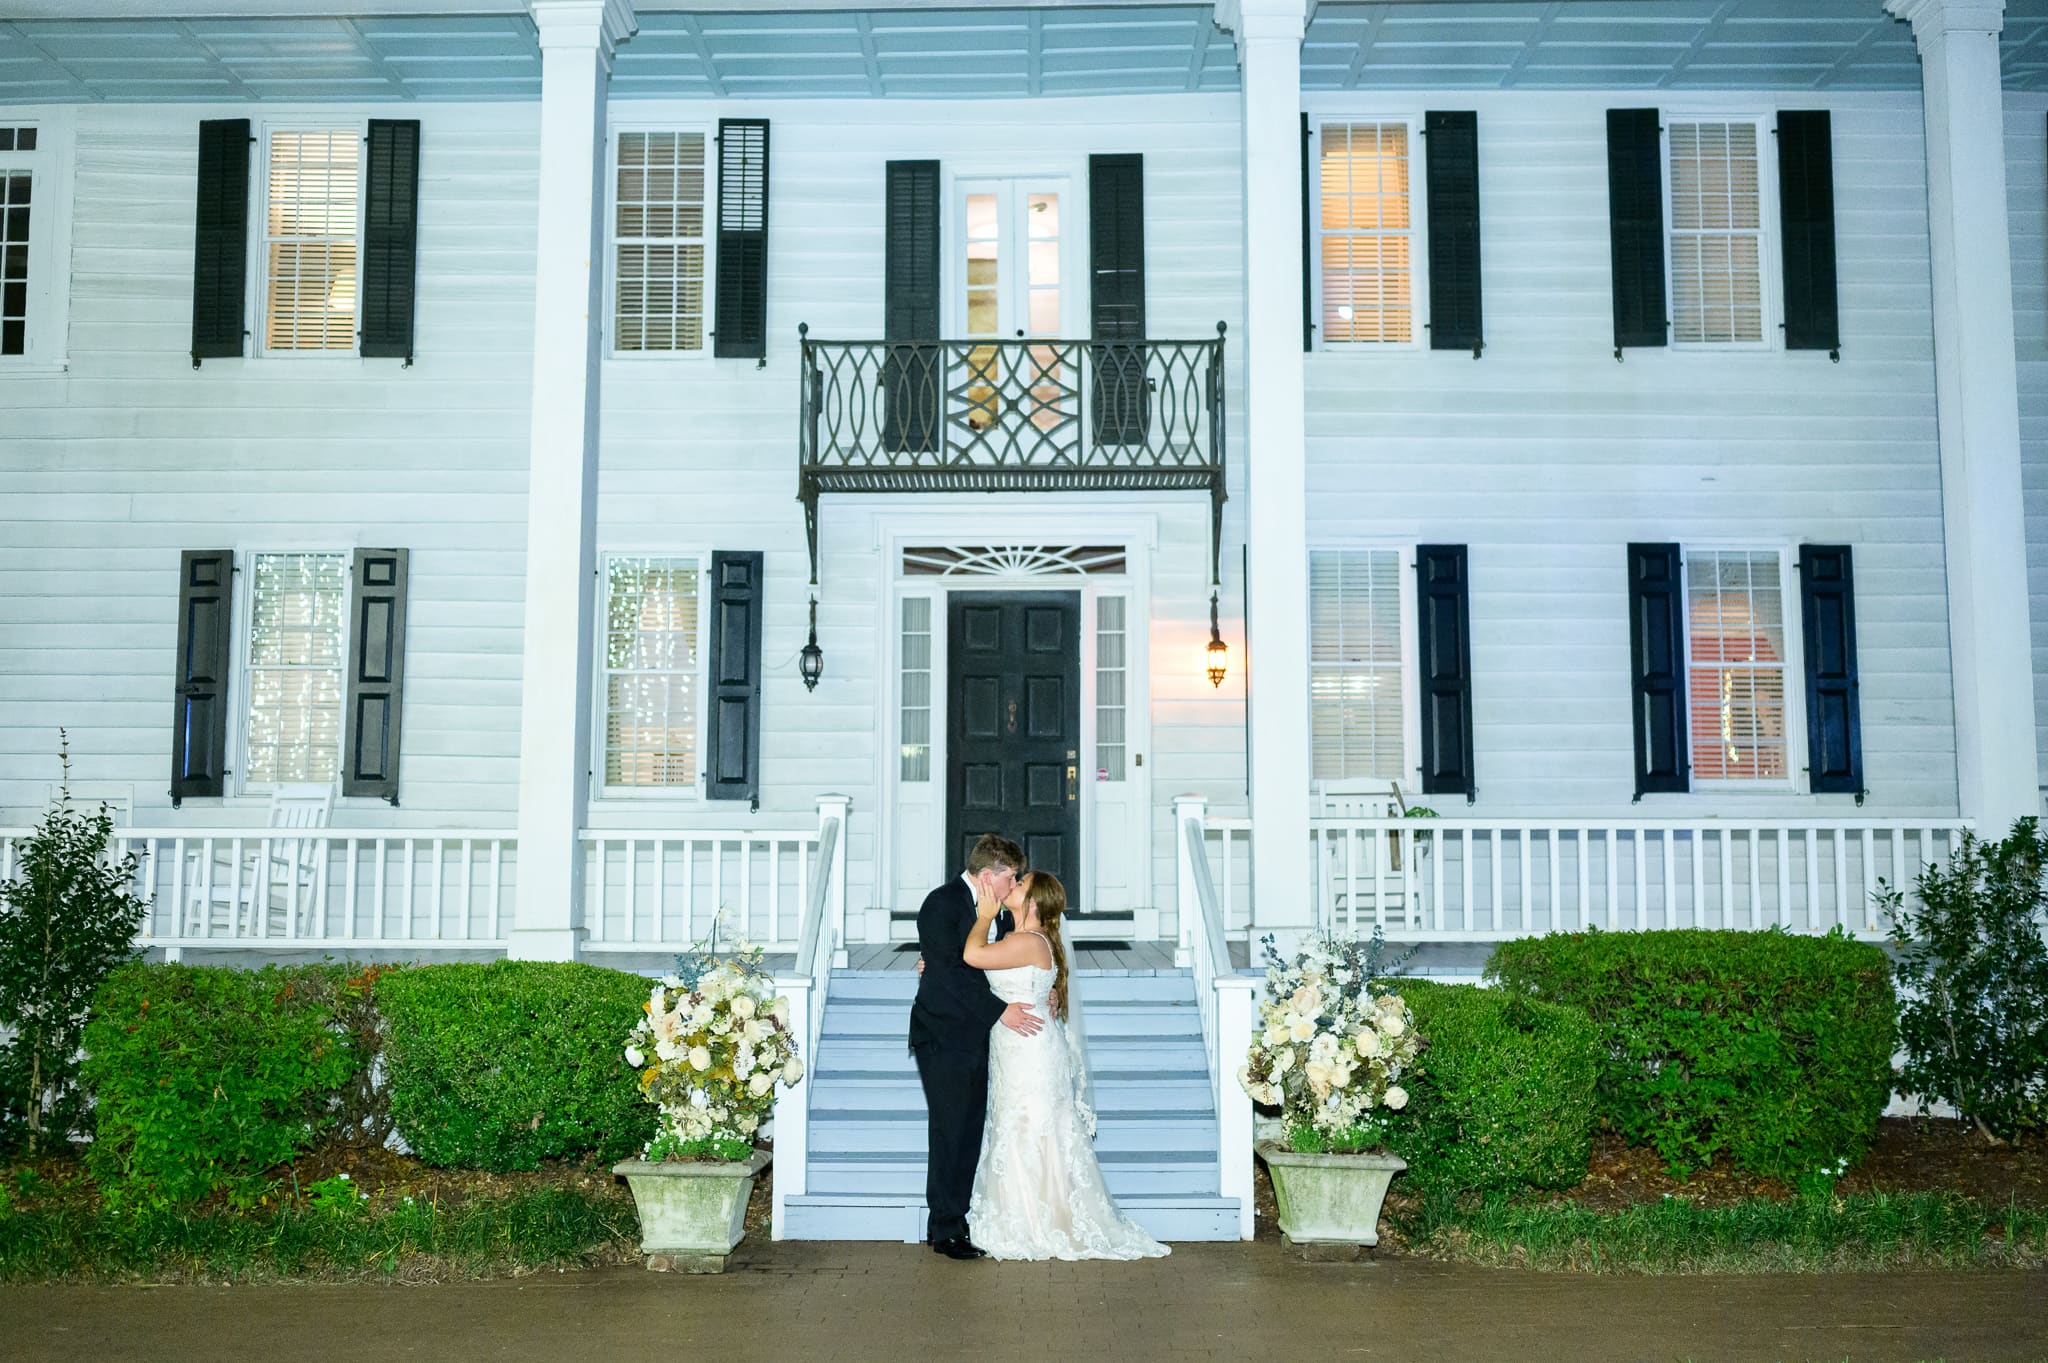 Kiss in front of the museum - Kaminski House Museum